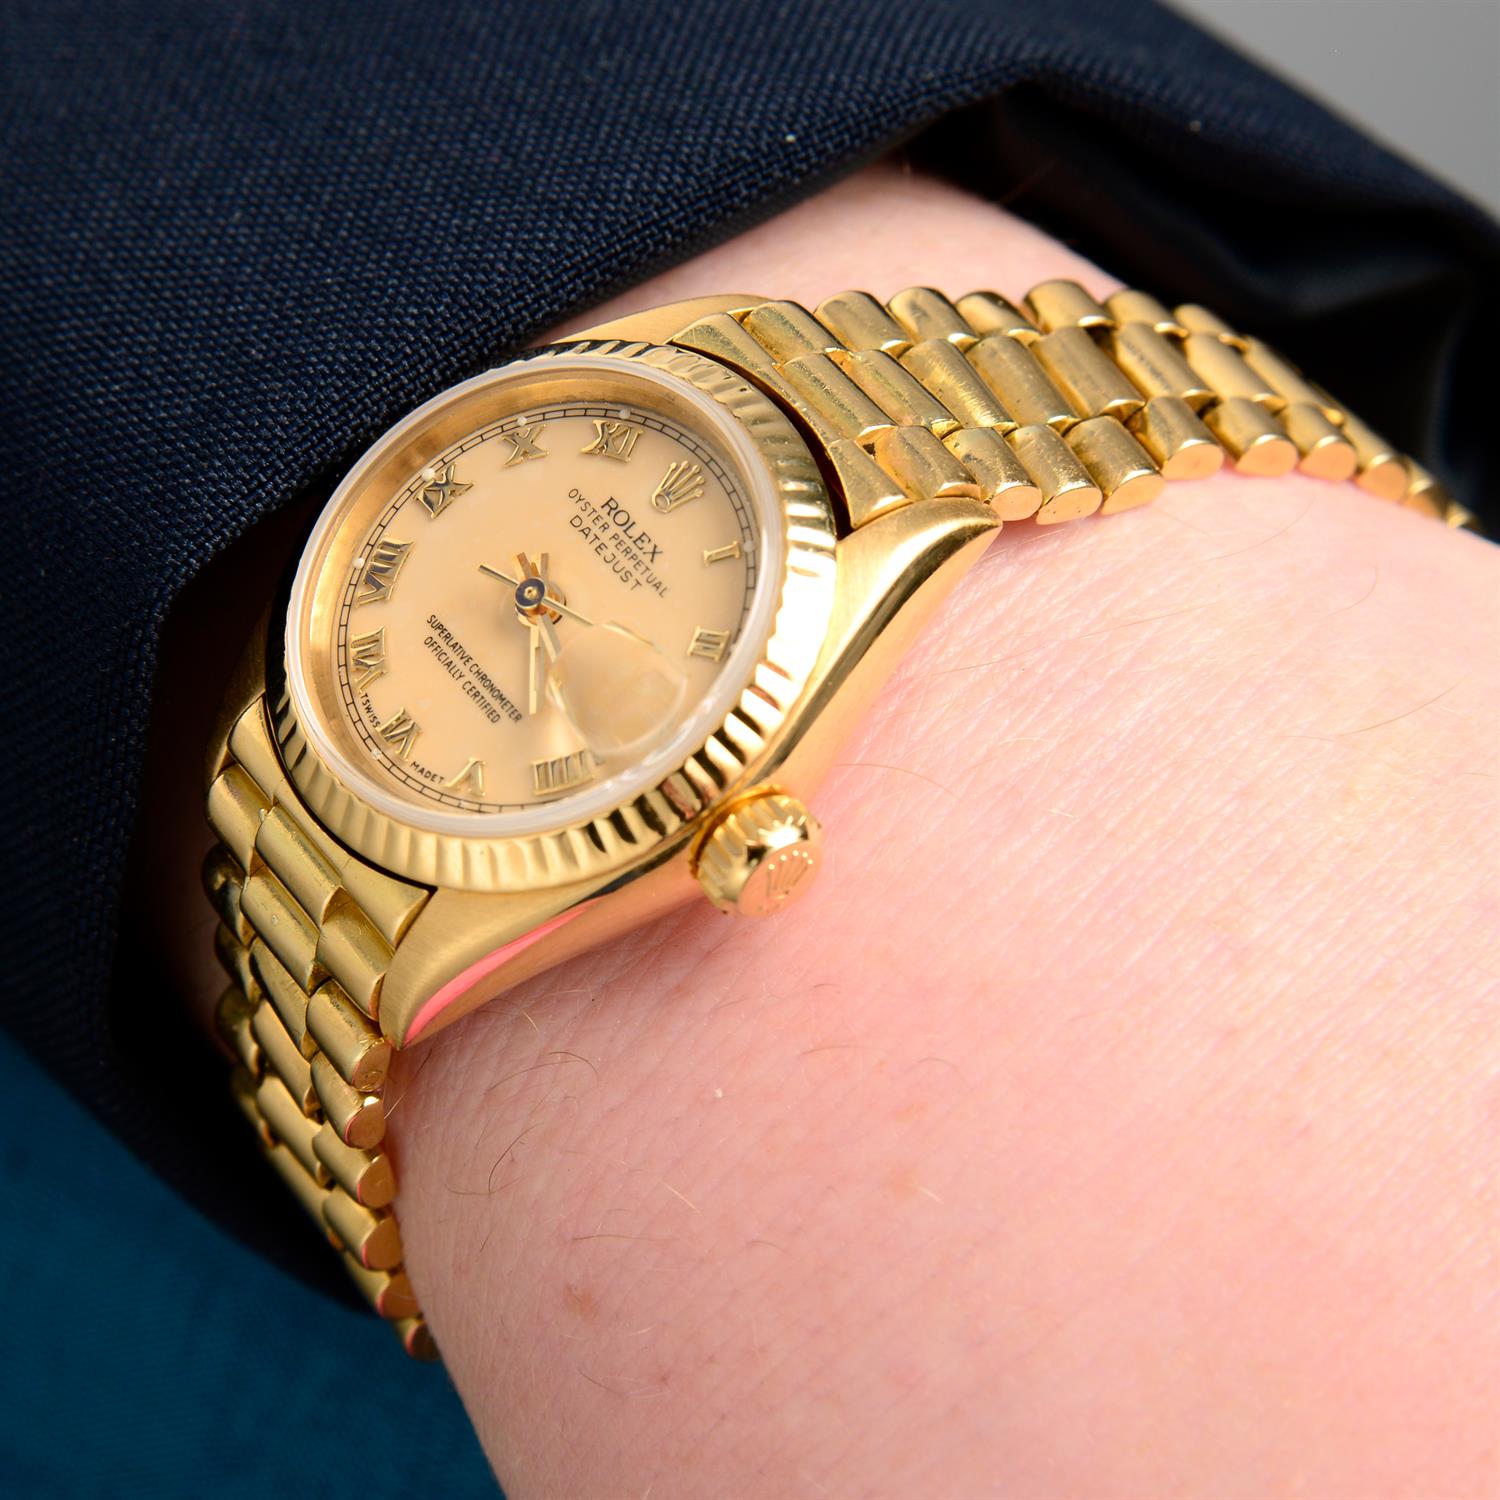 Rolex - an Oyster Perpetual Datejust watch, 26mm. - Image 7 of 7